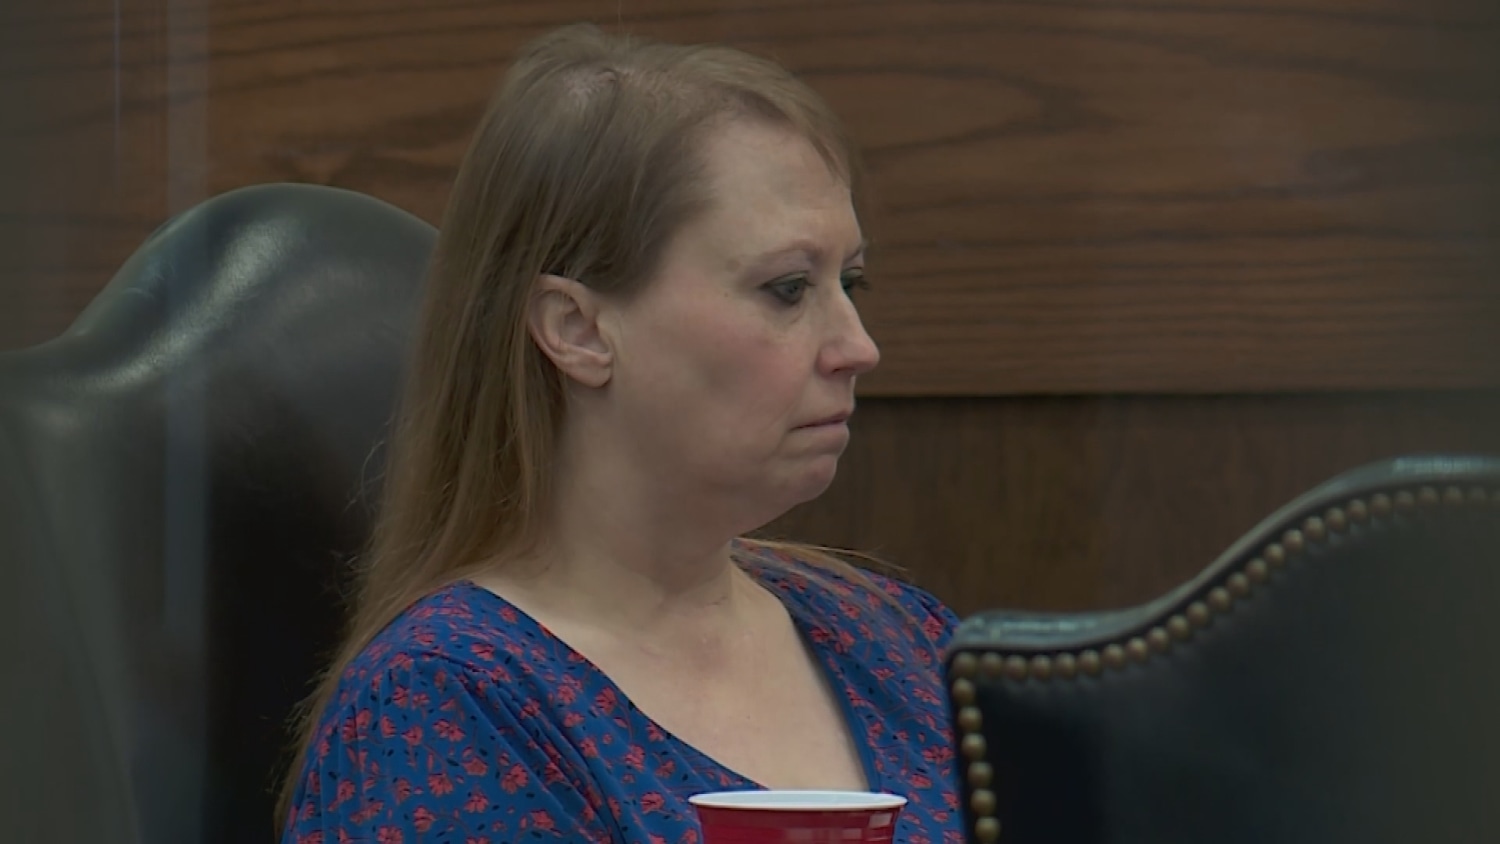 Oklahoma woman gets life in prison after admitting she asked her lover to kill her allegedly abusive pastor husband image